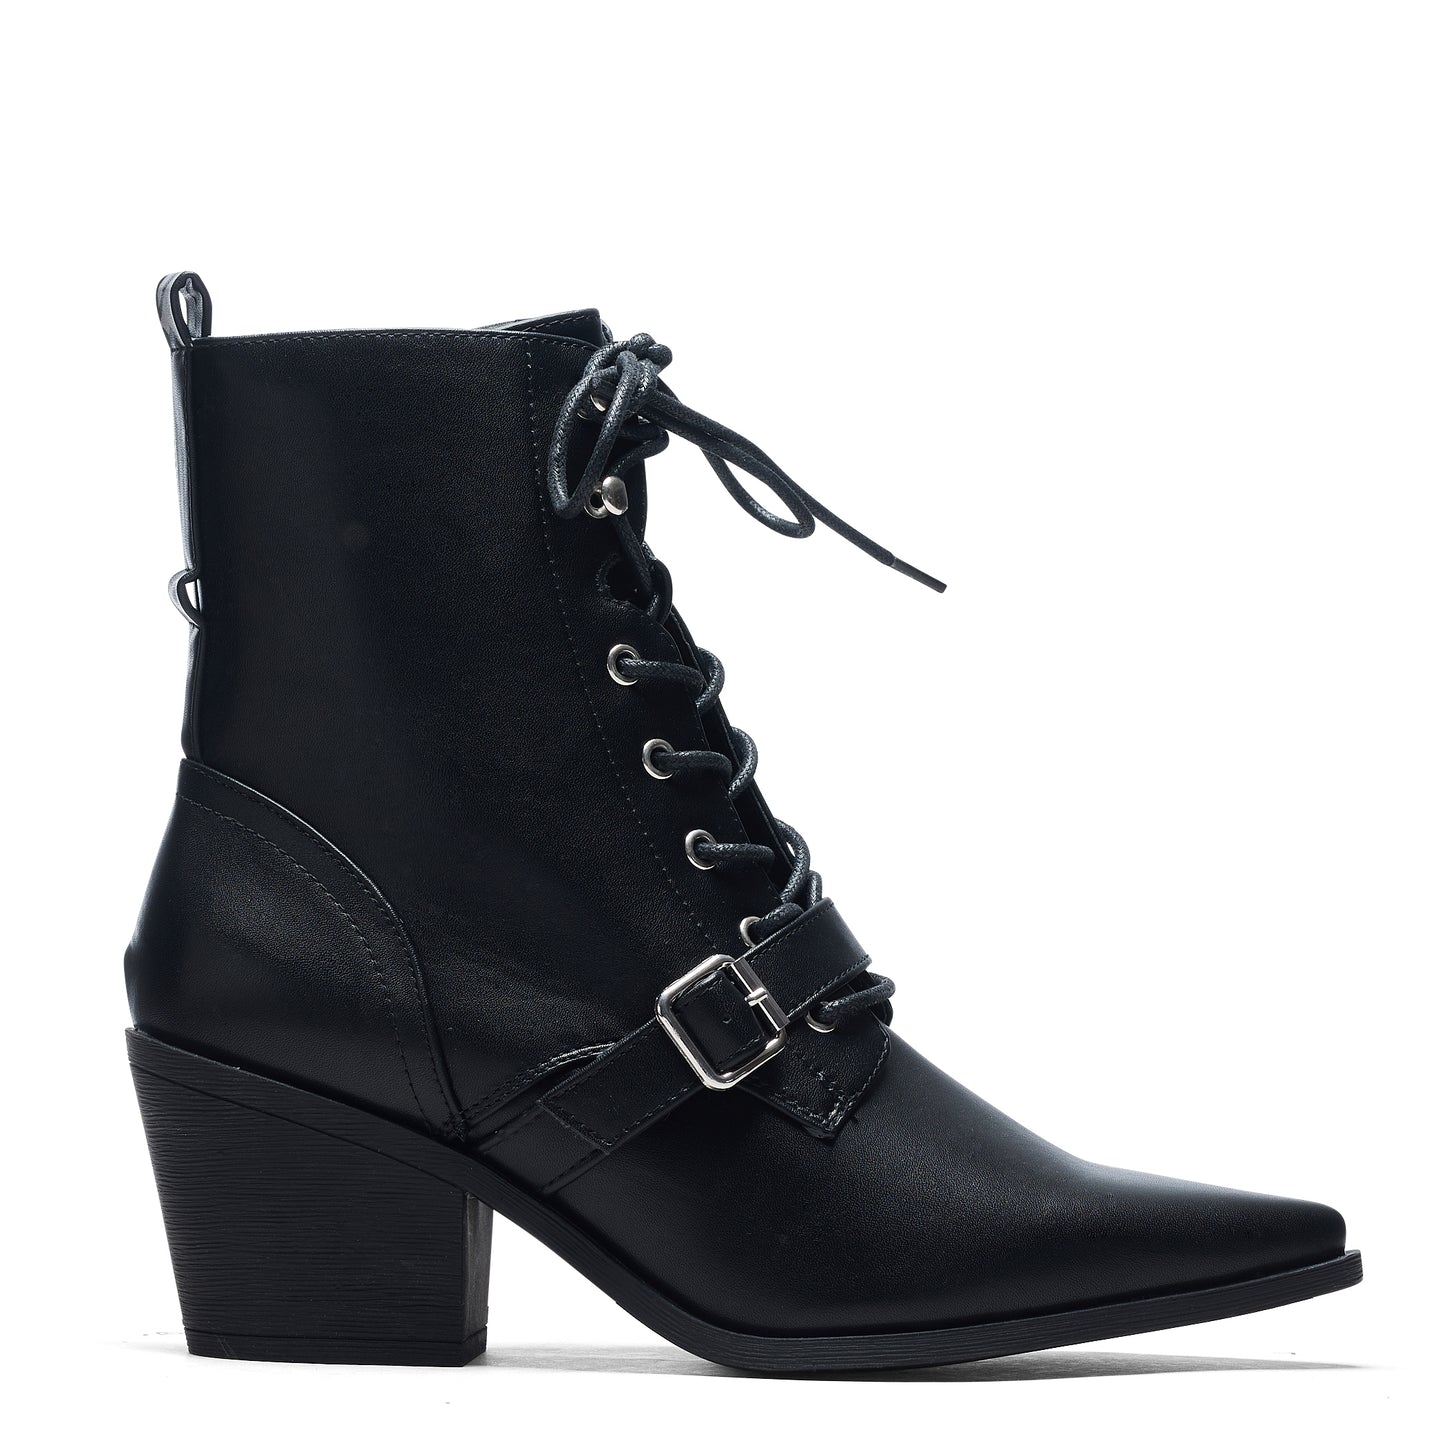 Hawk Pointed Cowboy Boots - Ankle Boots - KOI Footwear - Black - Side View